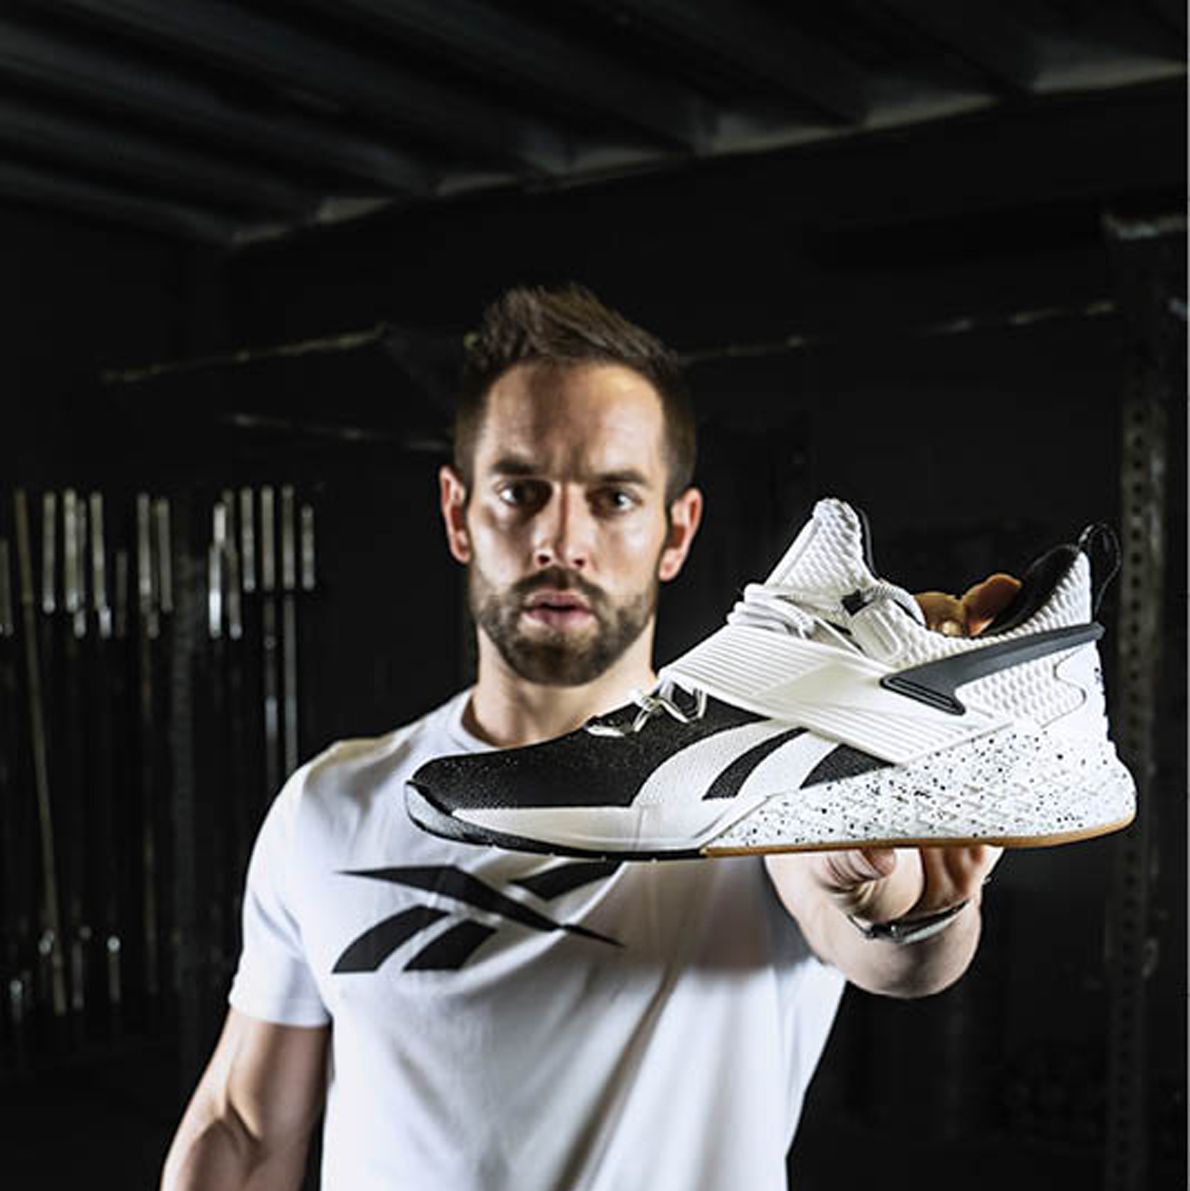 to Release Signature Rich Froning Nano X CrossFit Shoe